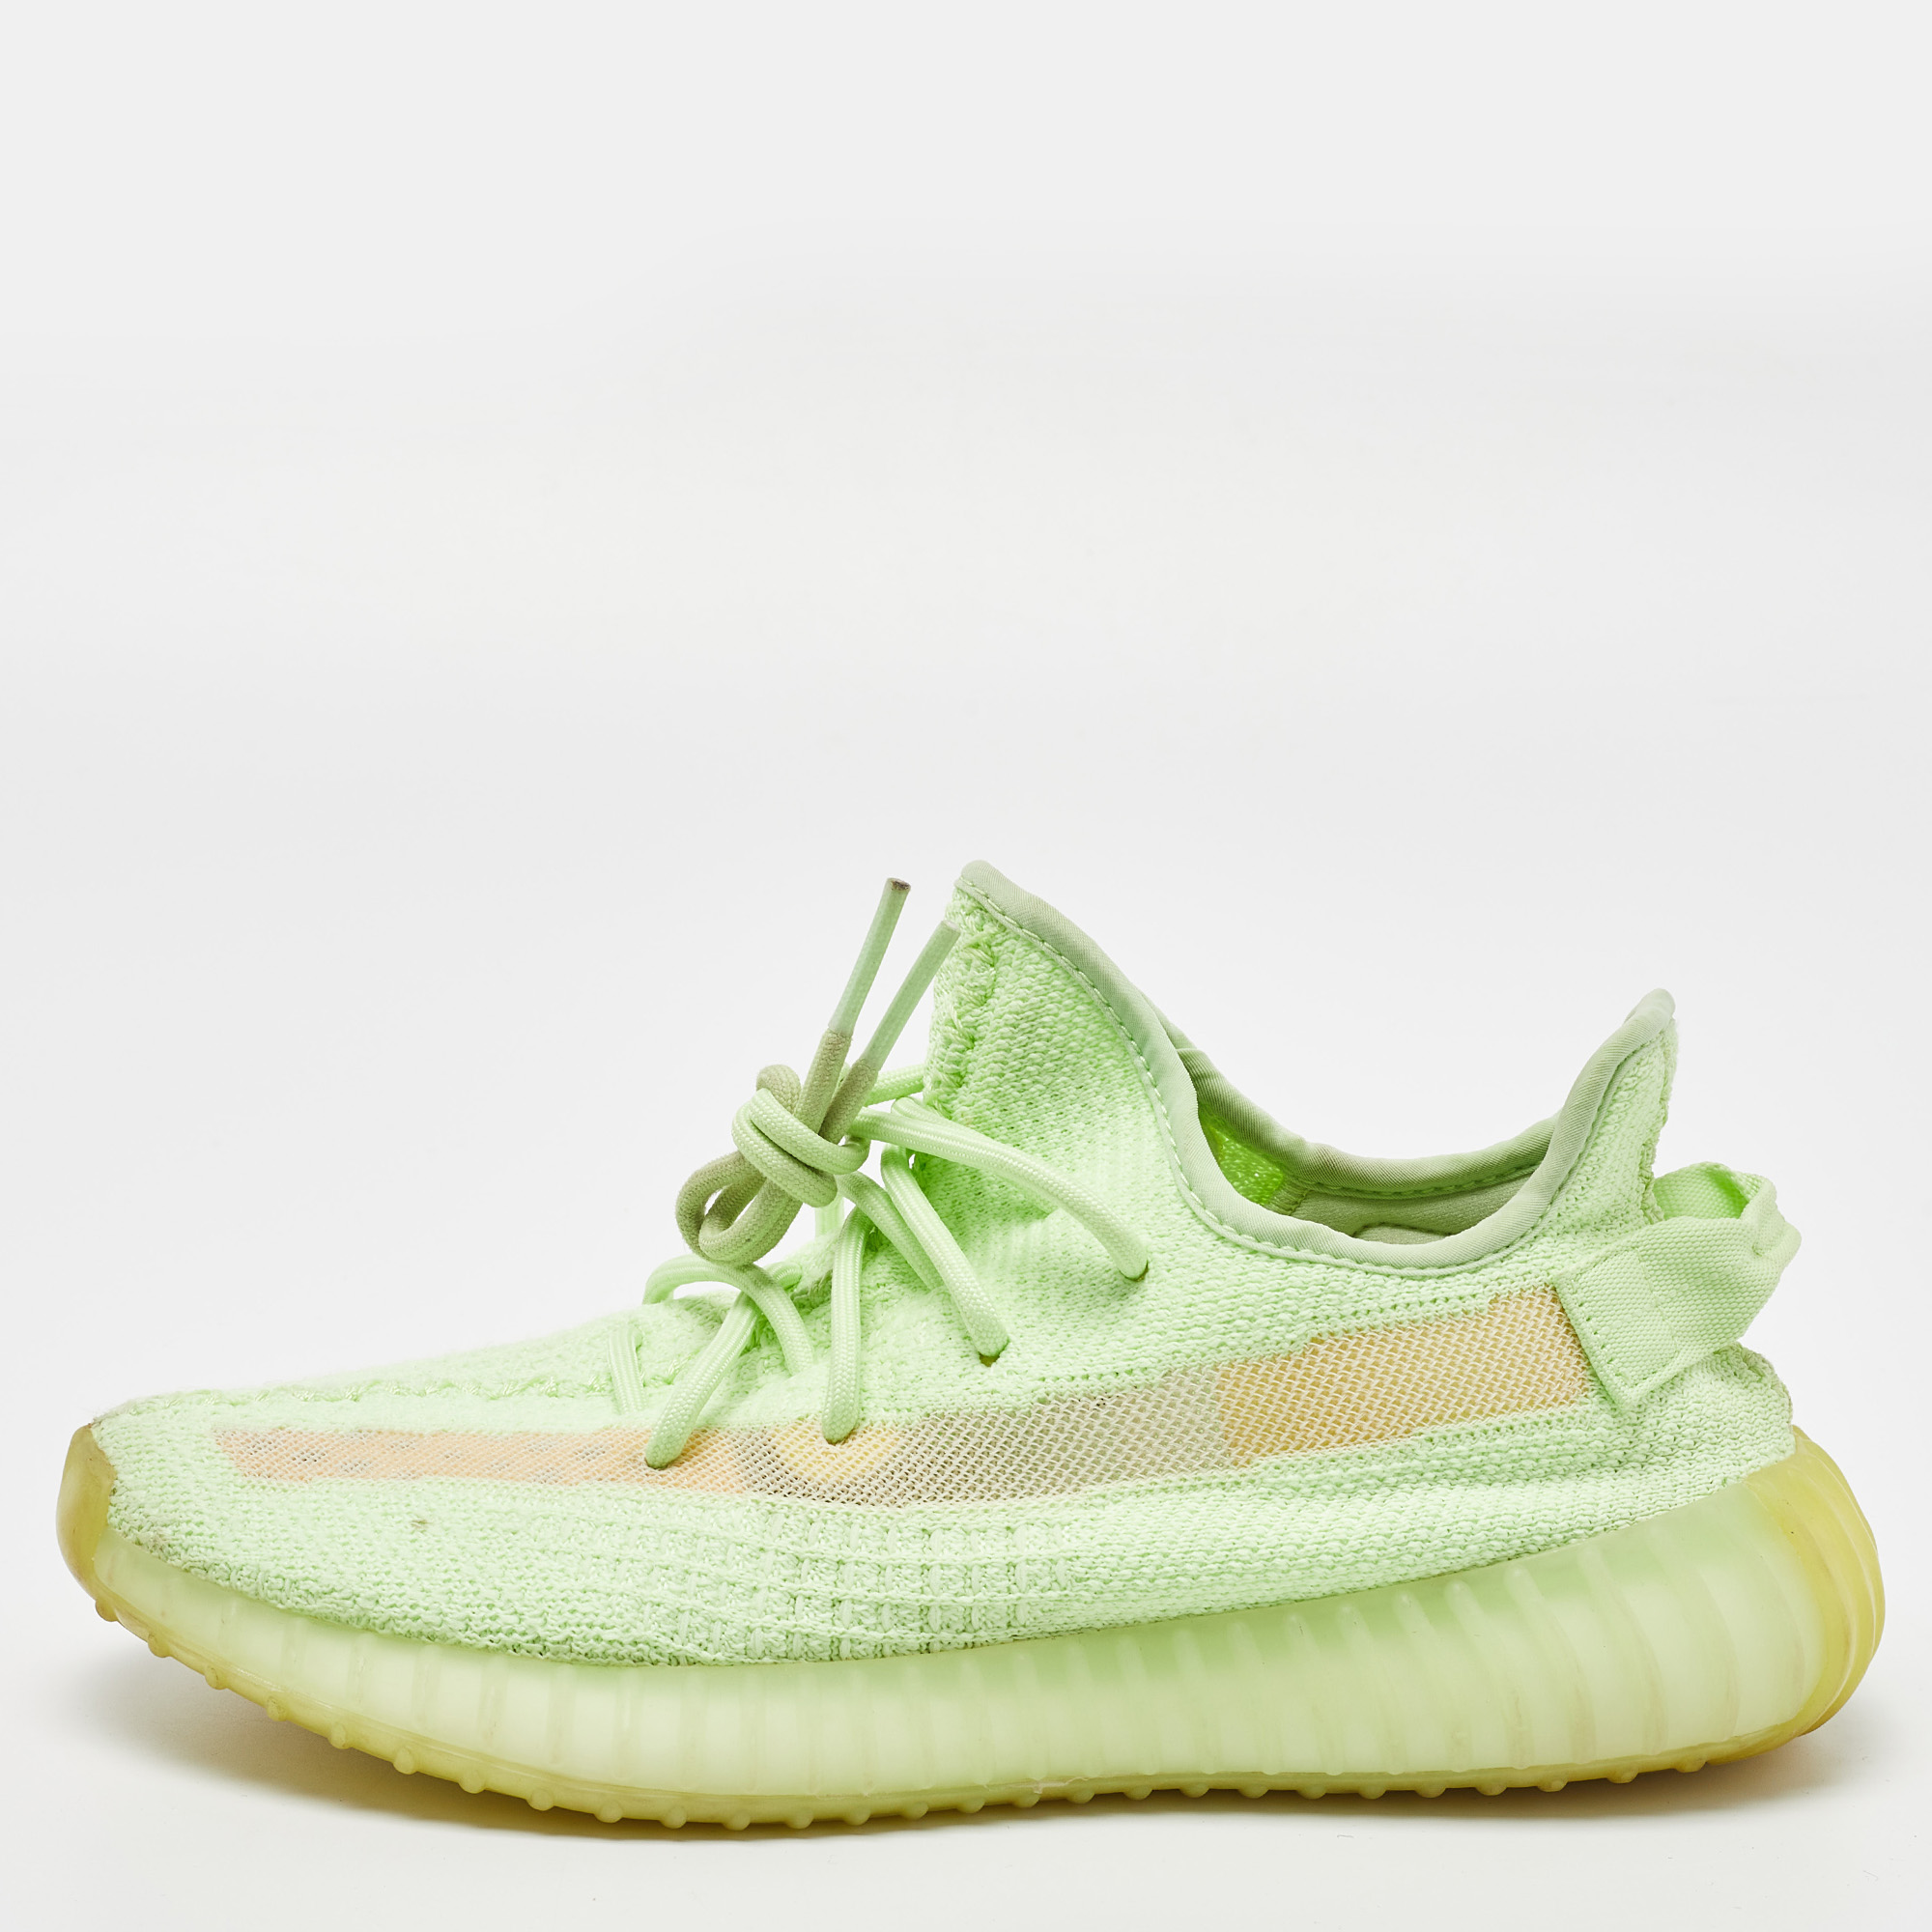 Pre-owned Yeezy X Adidas Green Knit Fabric Boost 350 V2 "gid' Glow Sneakers Size 40 2/3